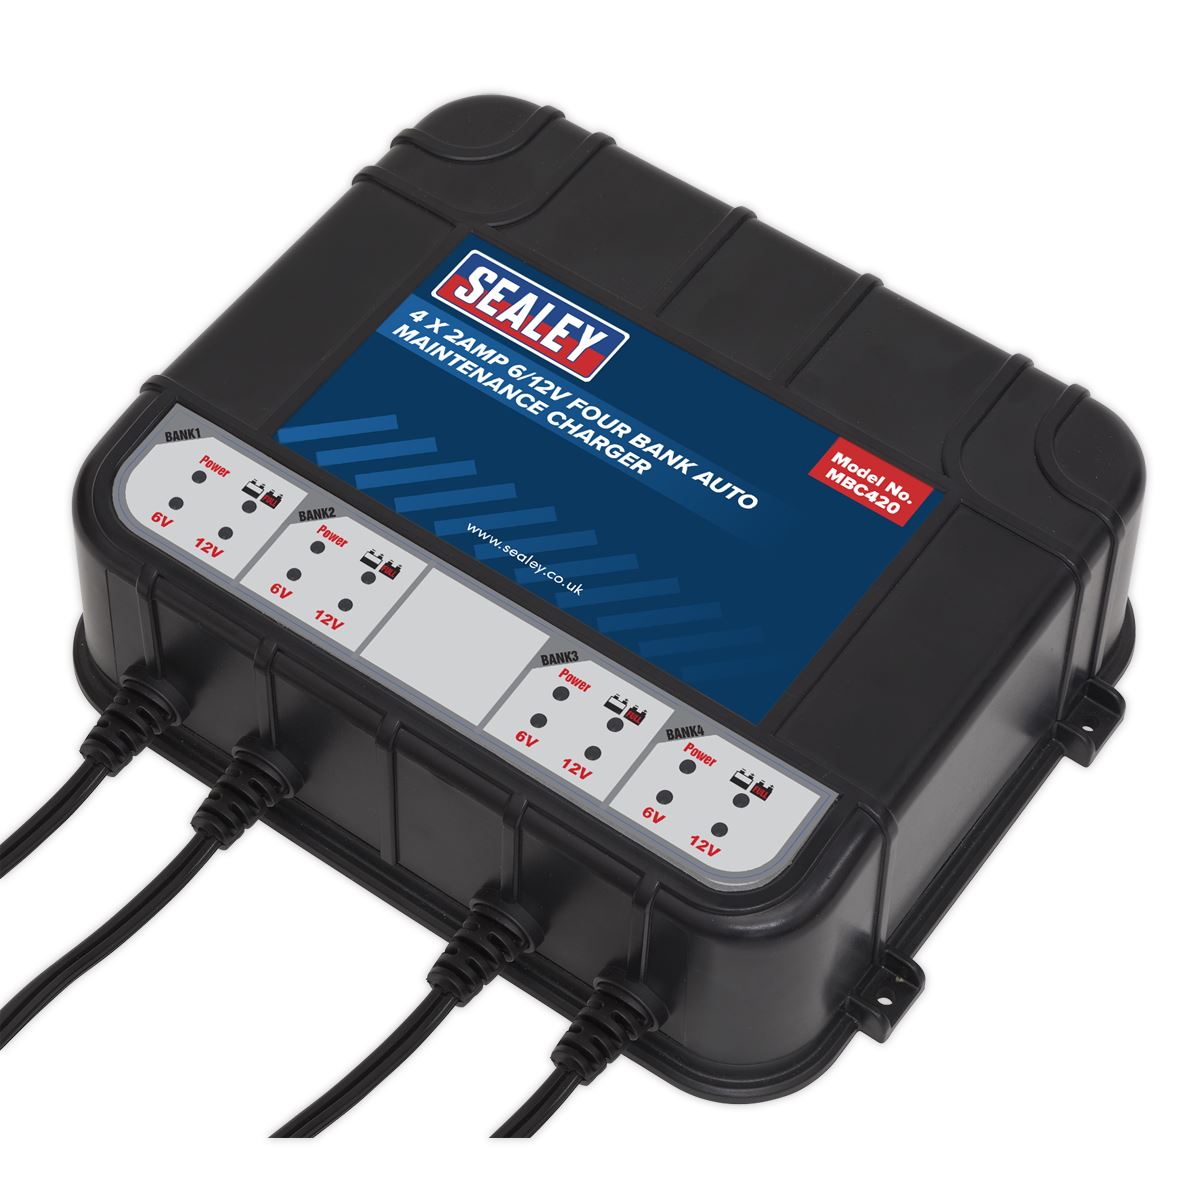 Sealey Four Bank 6/12V 8A (4 x 2A) Auto Maintenance Charger